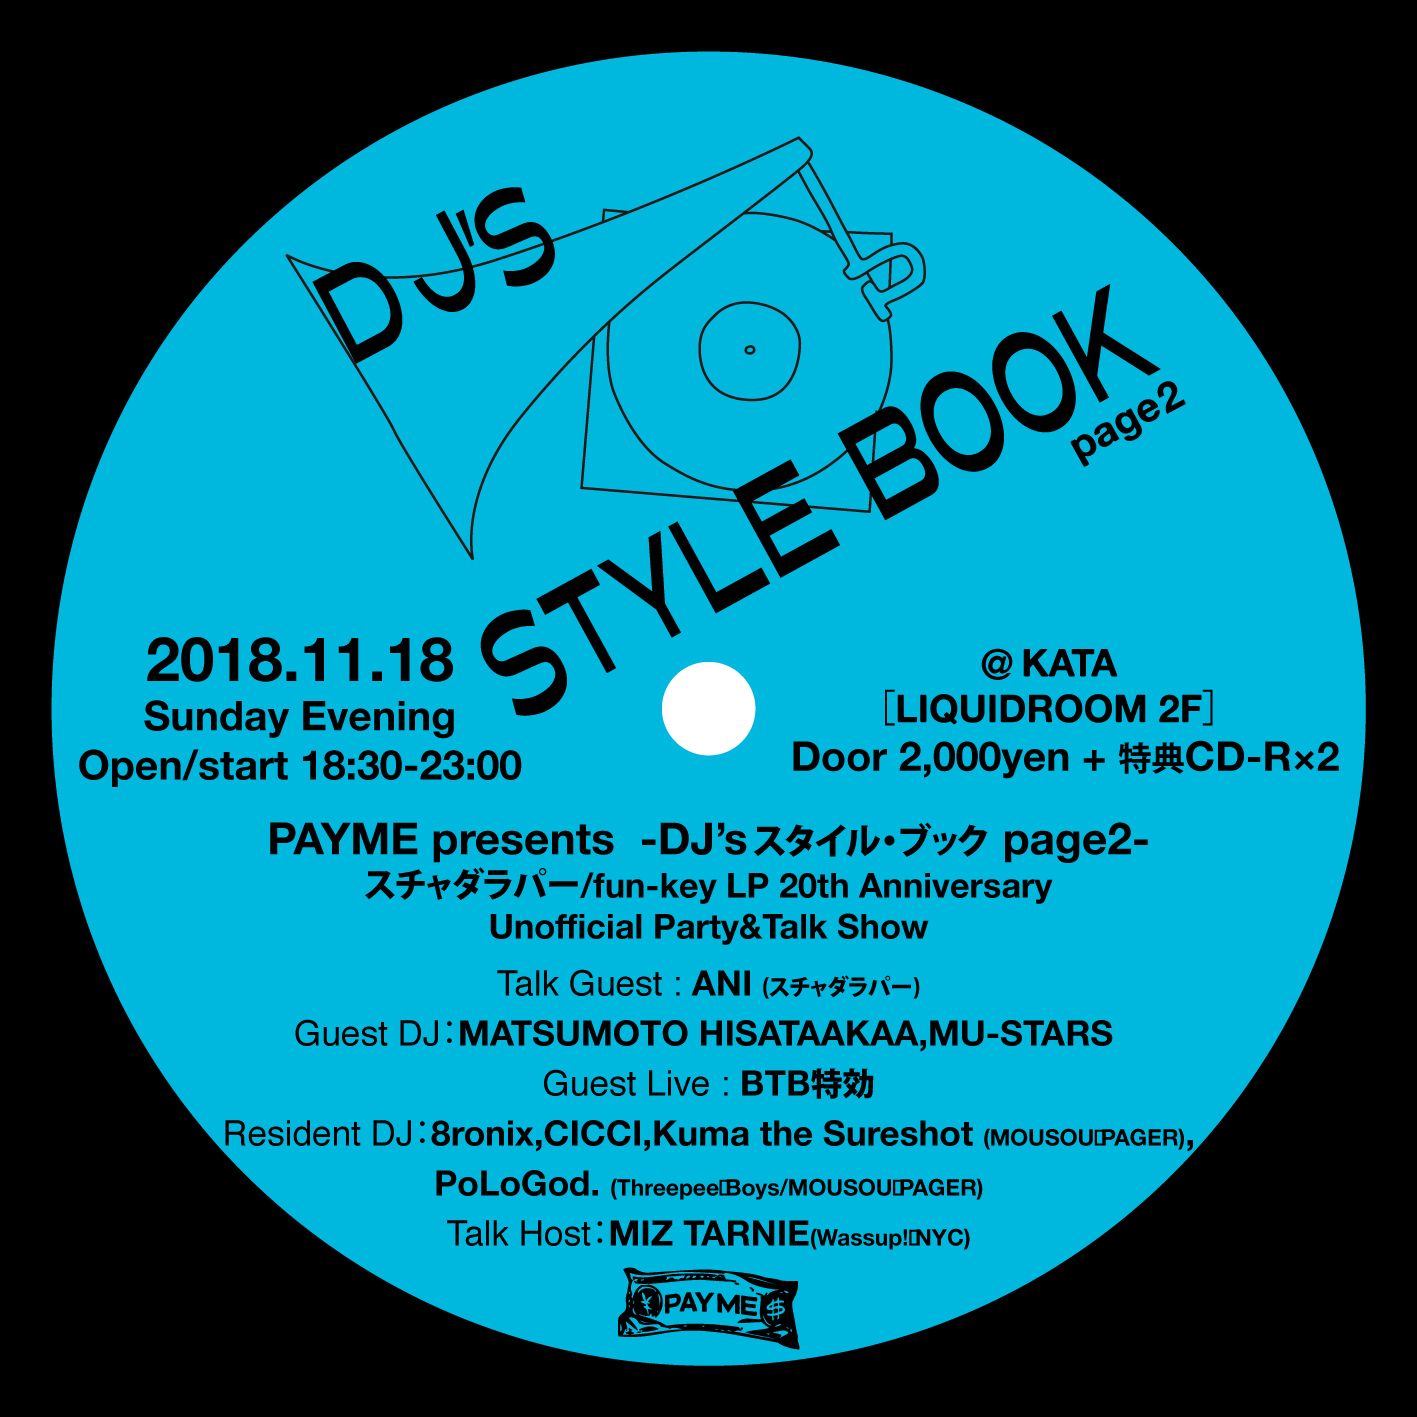 PAY ME presents『DJ's スタイル・ブック page 2』